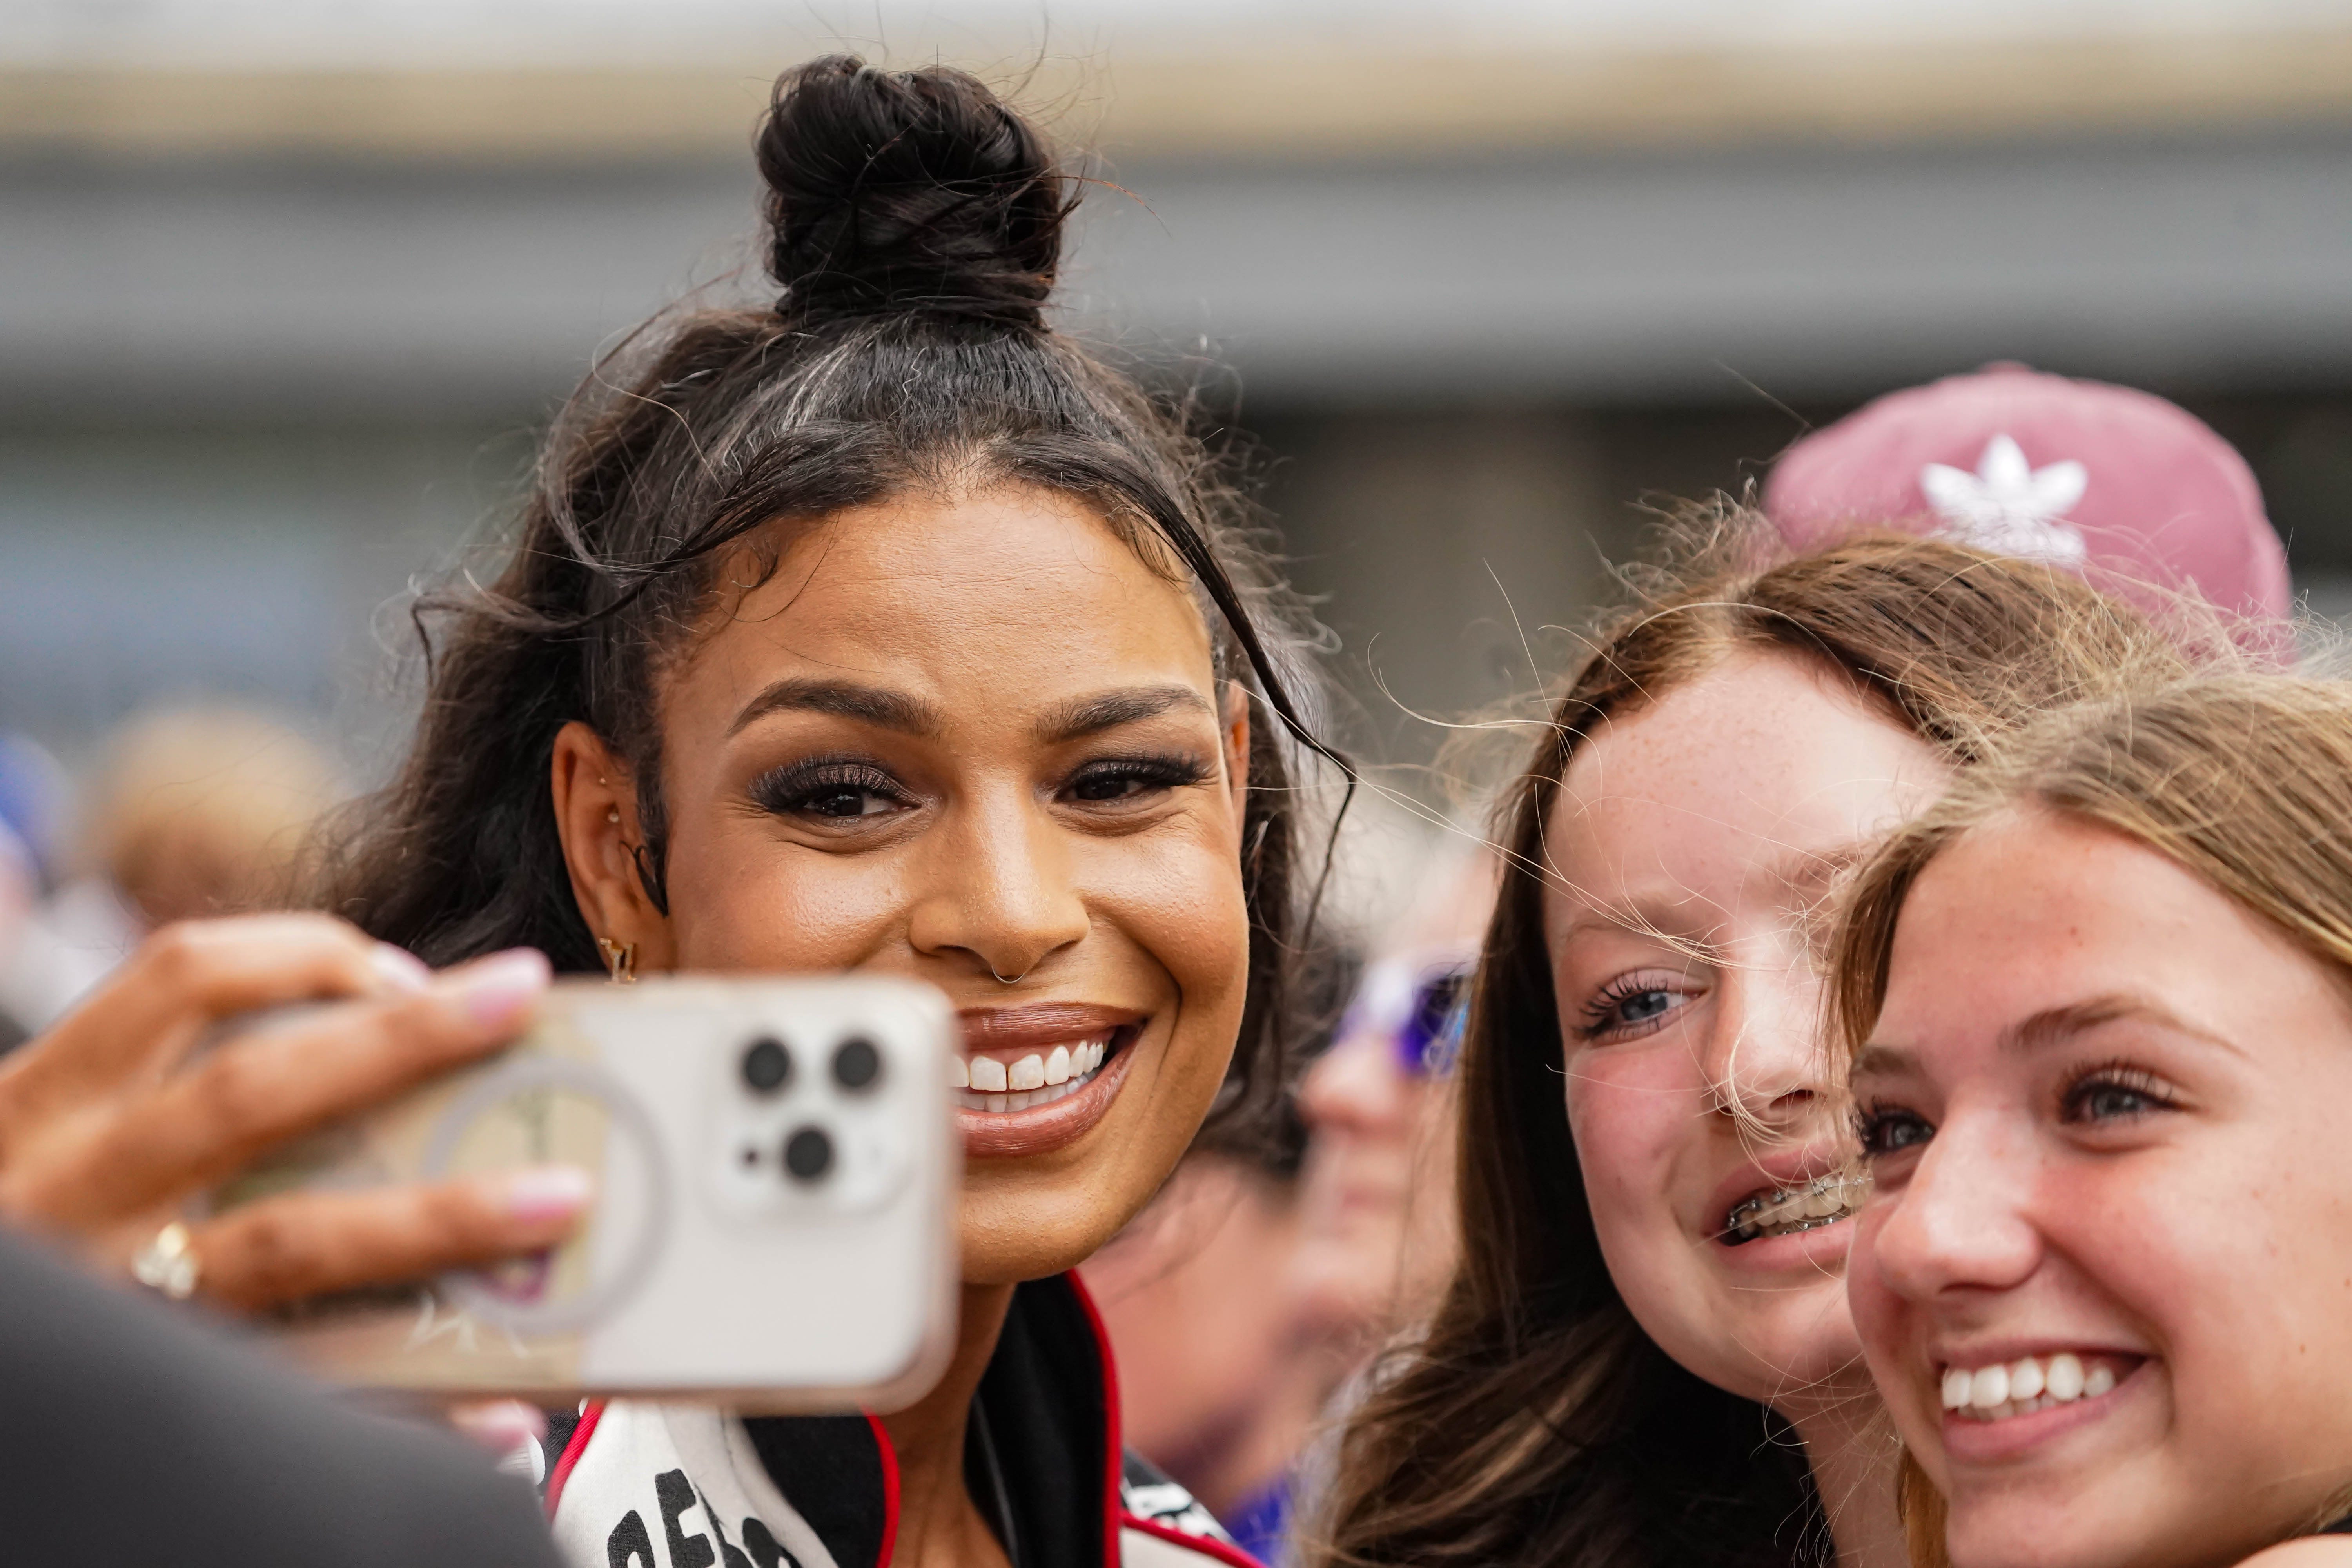 How did Jordin Sparks do singing the national anthem at Indy 500? One fan gave her 100/10